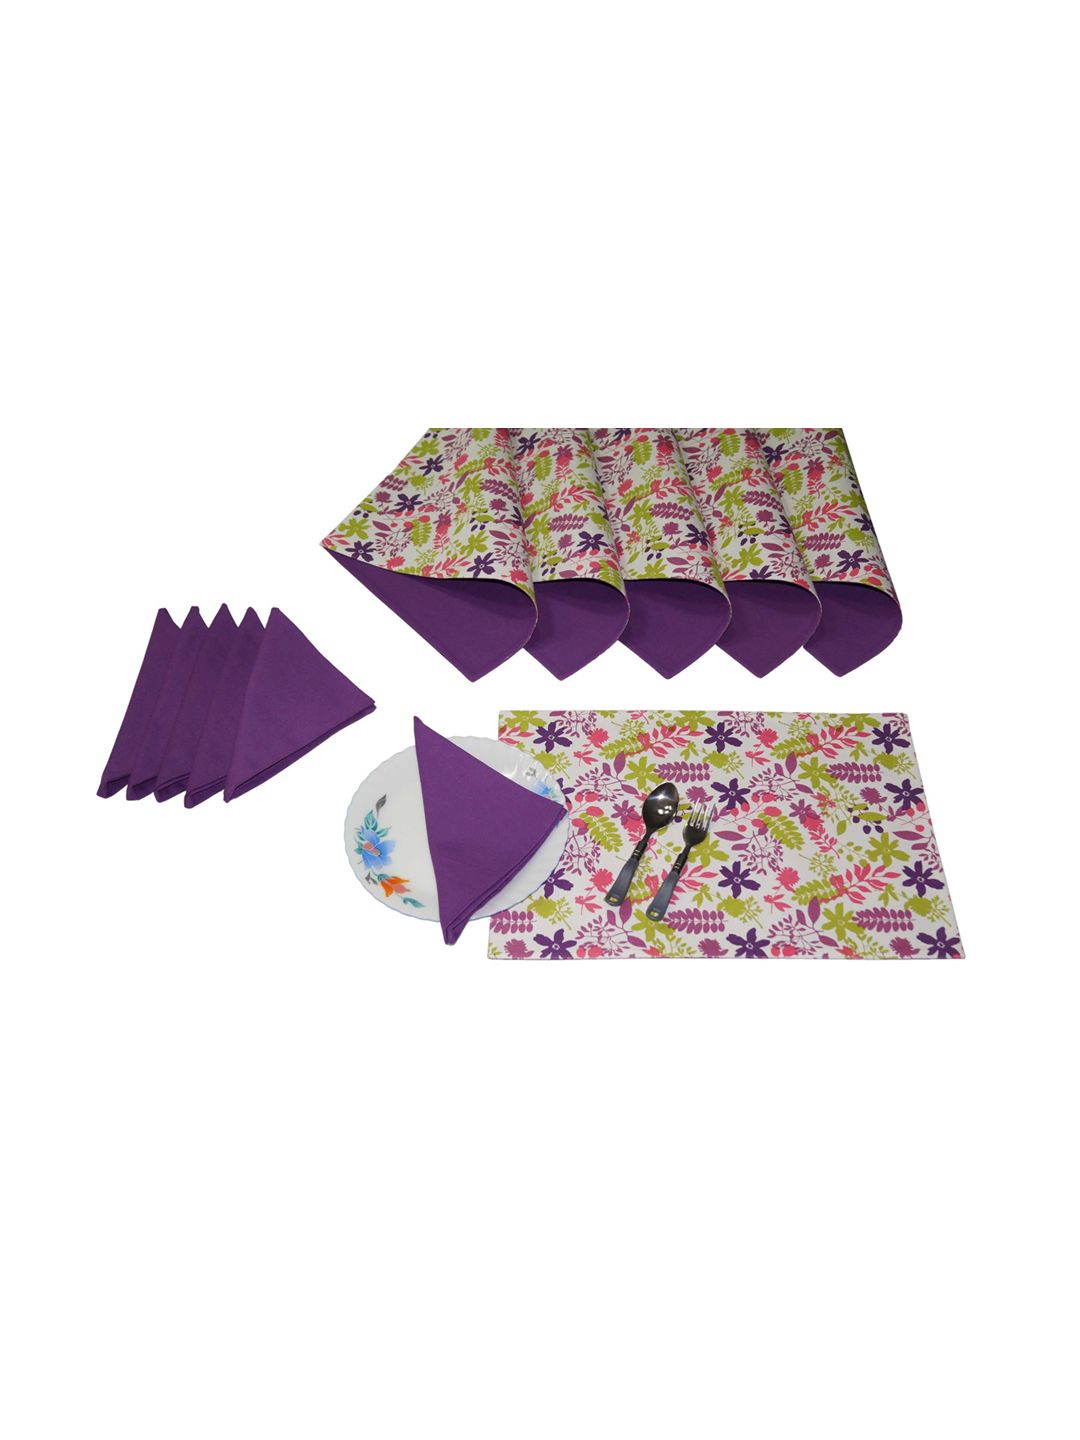 Lushomes Set Of 12 Purple & Green Floral Printed Rectangle Table Placemats & Napkins Price in India